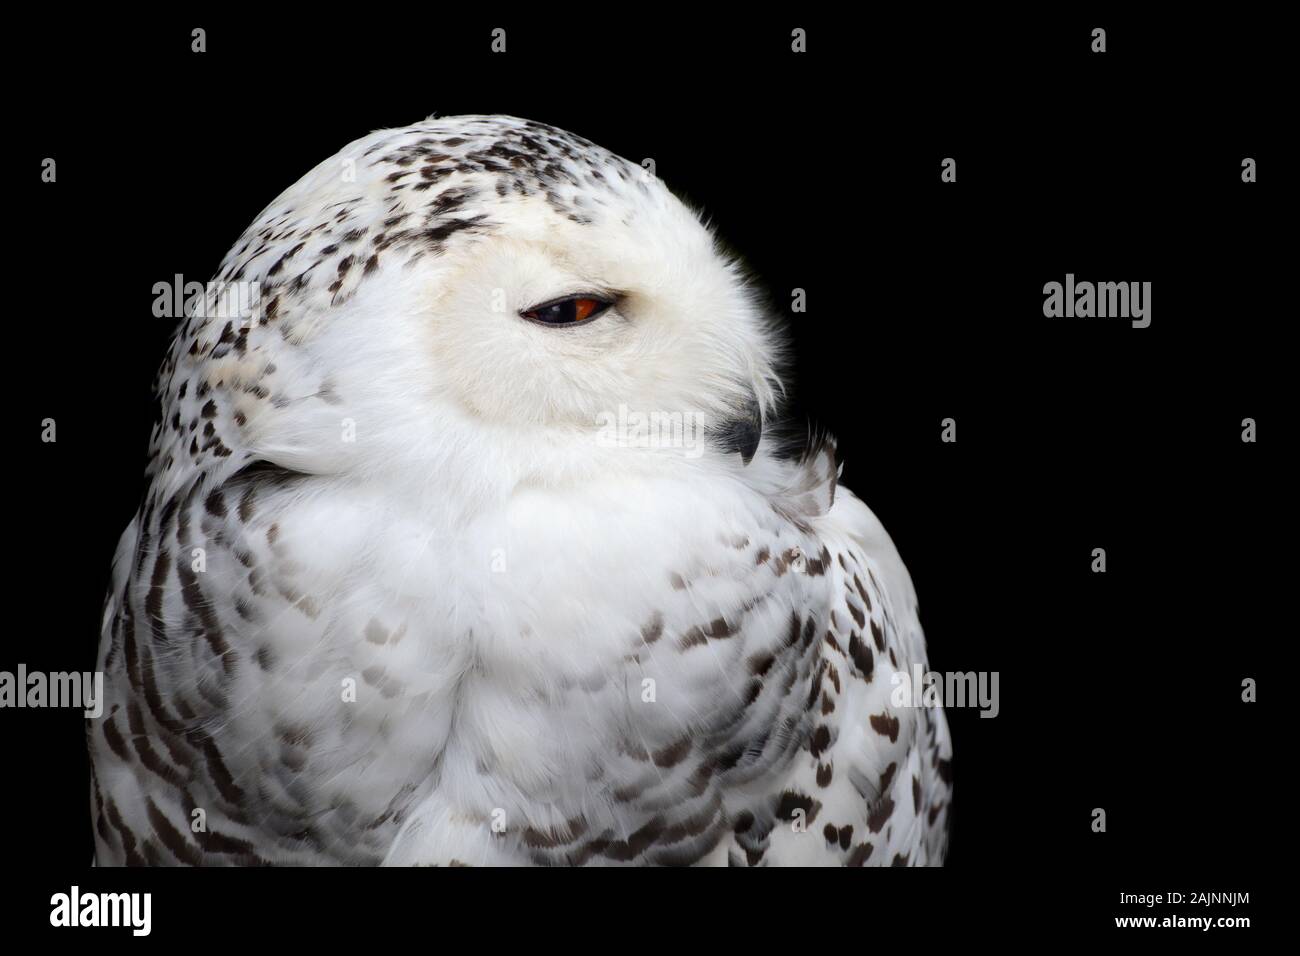 Closeup bird of prey portrait of a snowy owl isolated against a black background Stock Photo